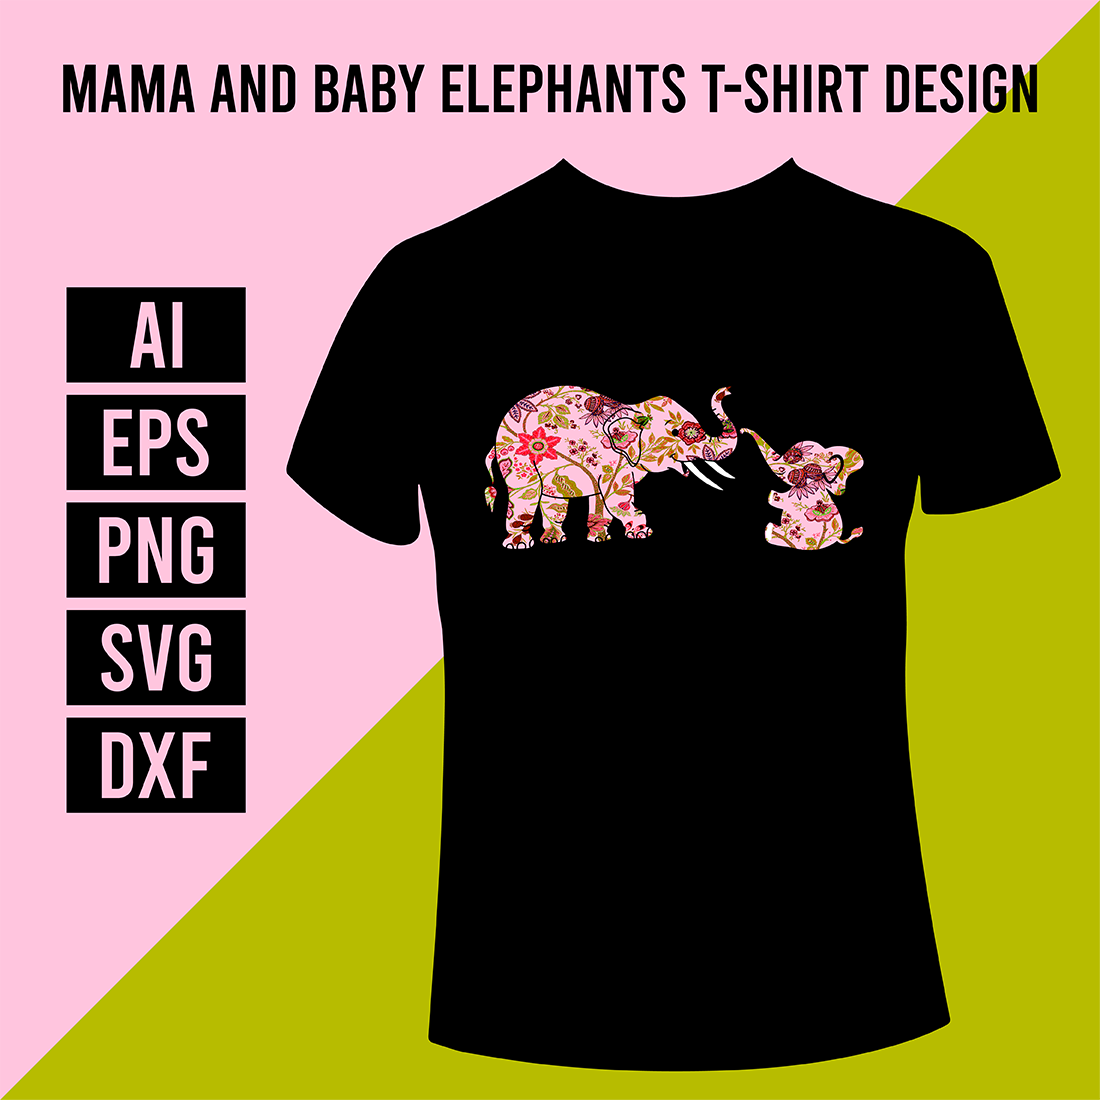 Mama and Baby Elephants T-Shirt Design cover image.